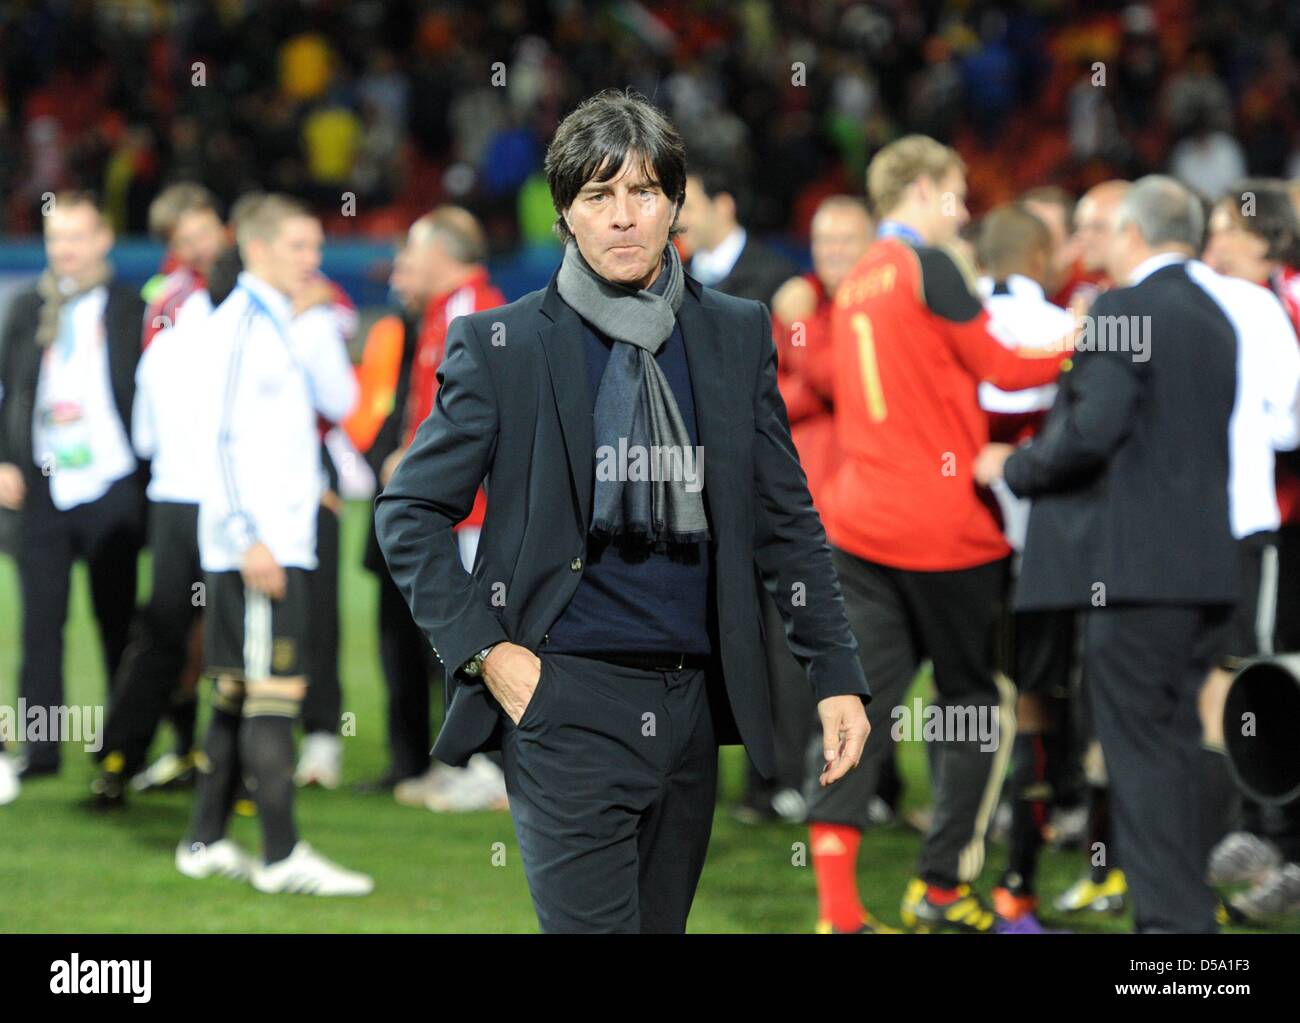 German coach Joachim Loew walks over the pitch after the 2010 FIFA World Cup third place match between Uruguay and Germany at the Nelson Mandela Bay Stadium in Port Elizabeth, South Africa 10 July 2010. Germany won 3:2. Photo: Marcus Brandt dpa - Please refer to http://dpaq.de/FIFA-WM2010-TC Stock Photo